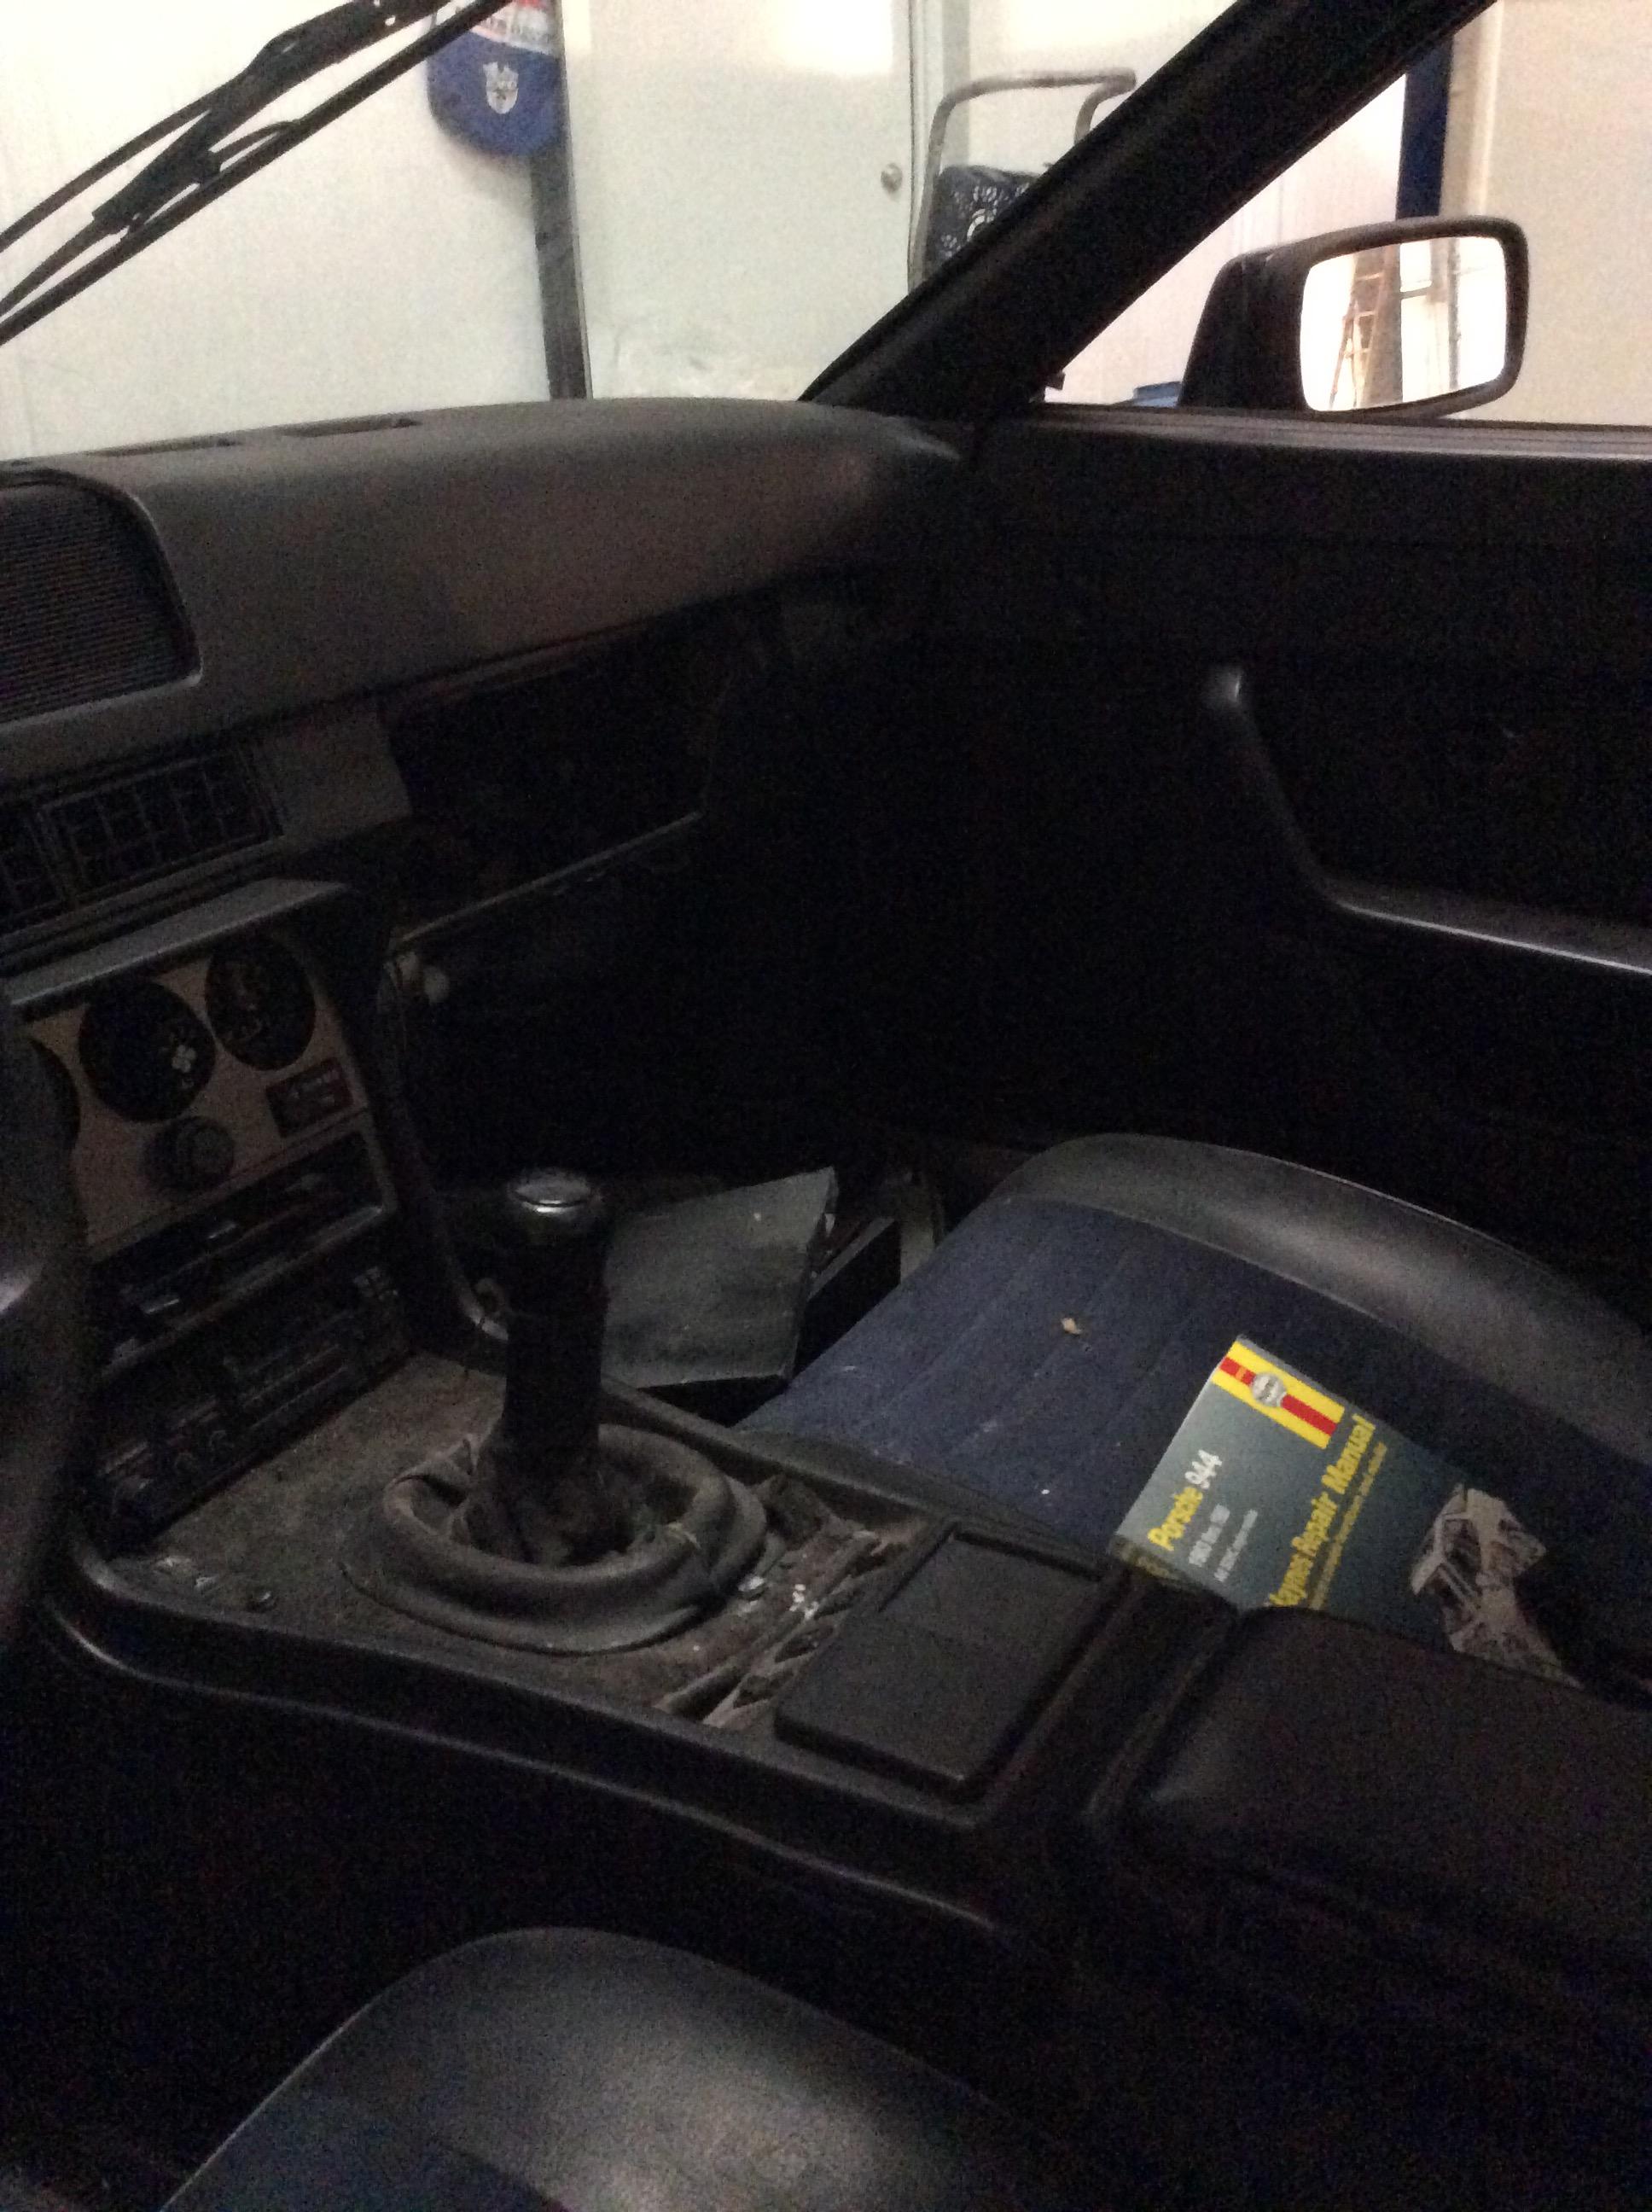 1983 Porsche 944, 26,000 Miles, Sun Roof, Spare Tire, Not Running, with Tit